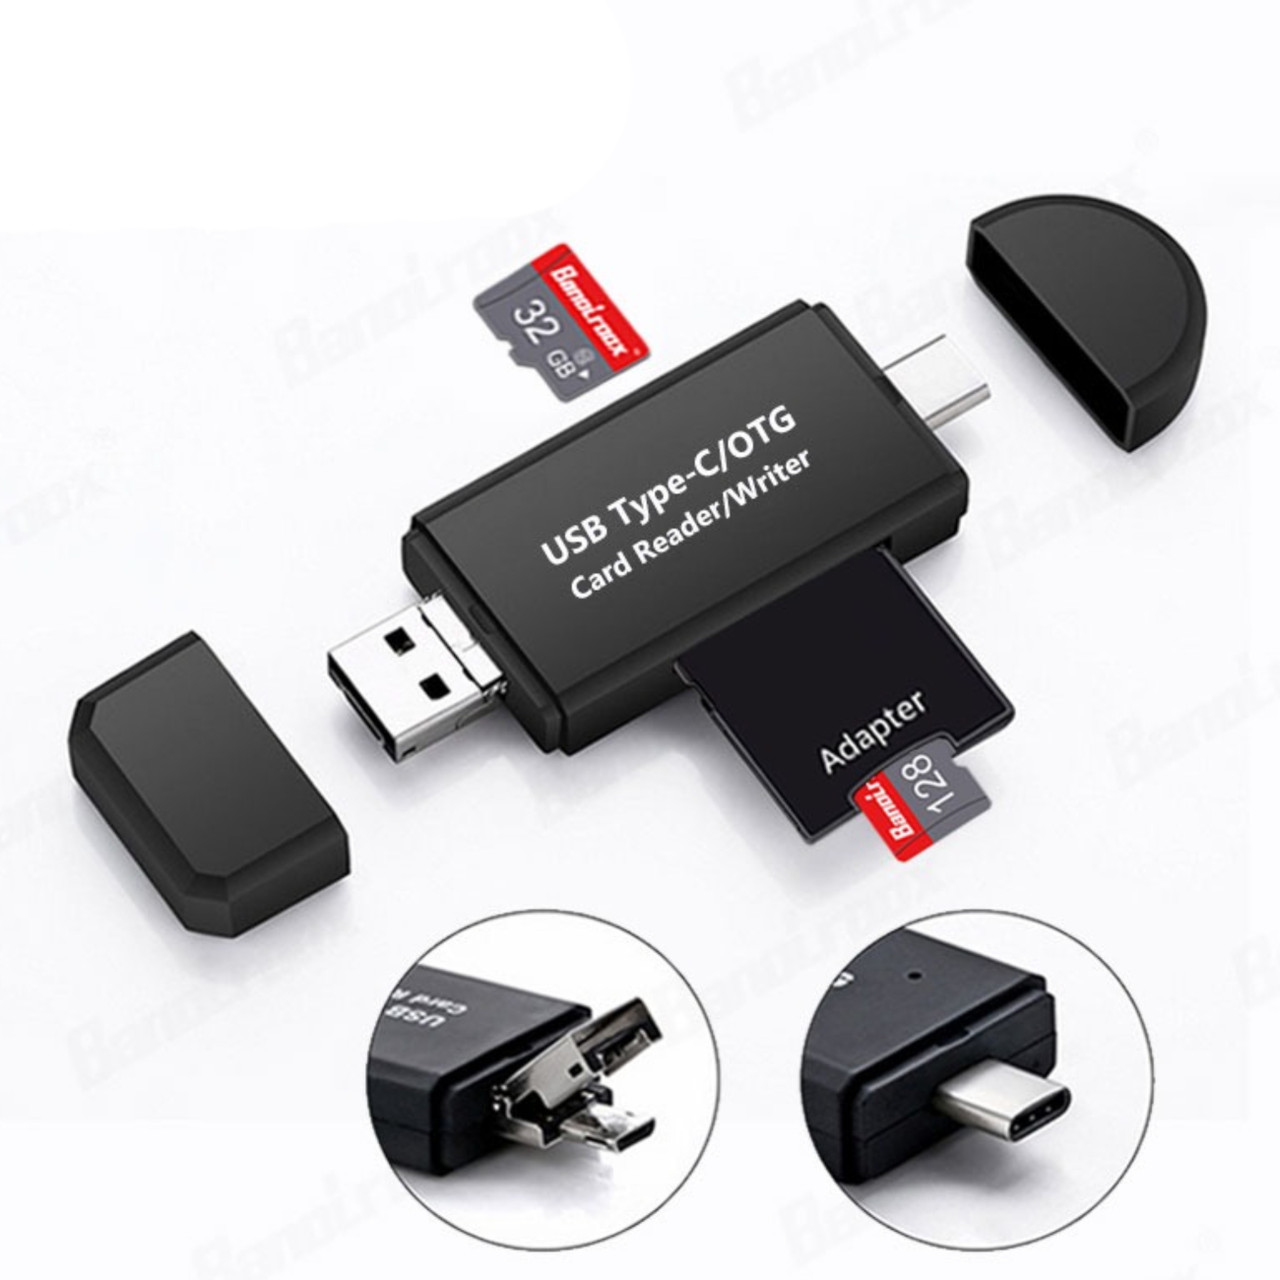 Micro USB OTG Charger USB HUB for Android Smart Phone and Tablet NEW 4 Port  2.0